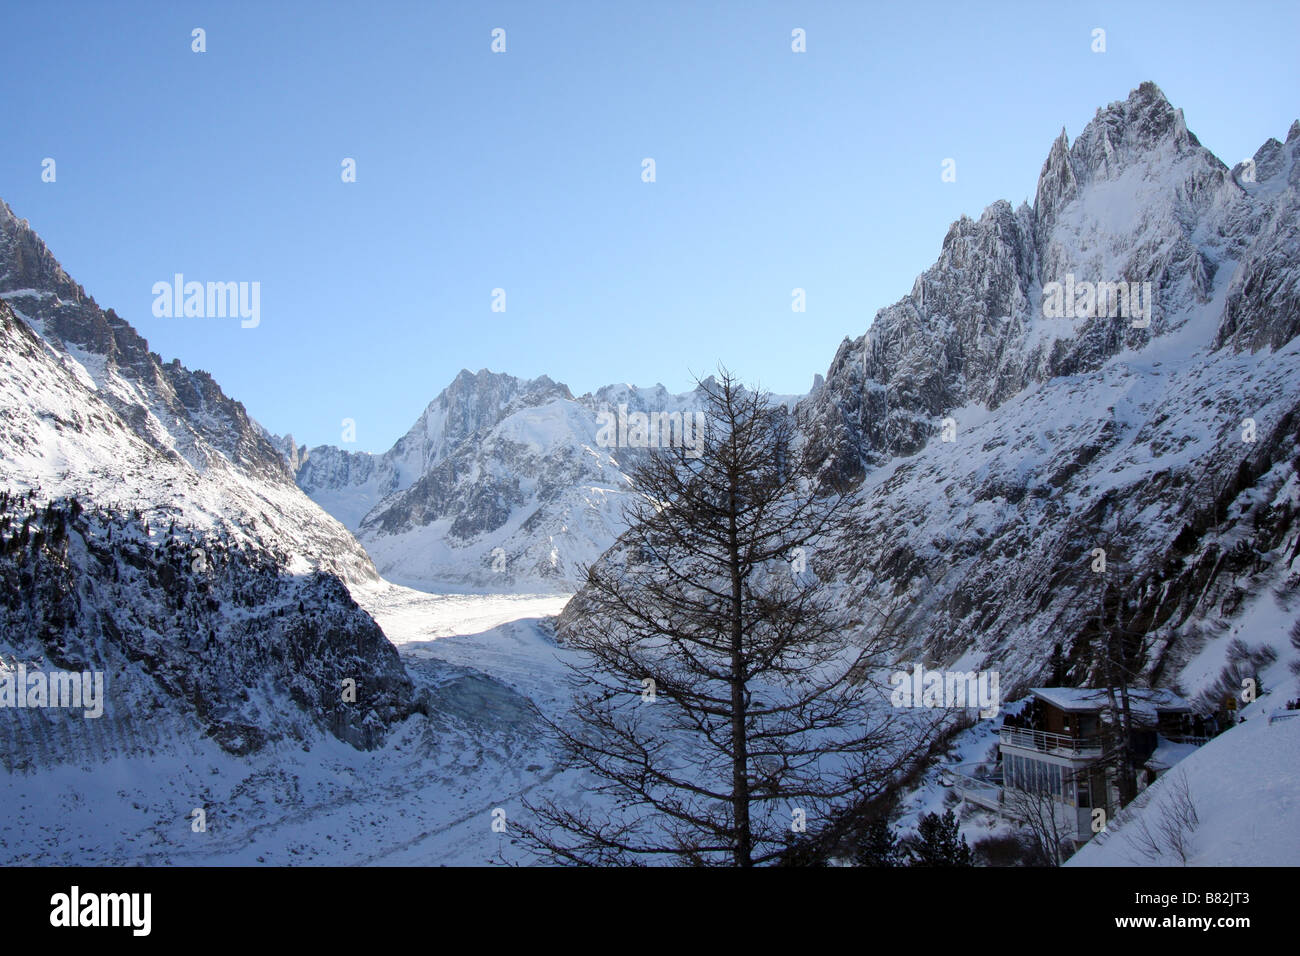 View of the Mer de Glace glacier in the Mont Blanc Massif, France Stock Photo